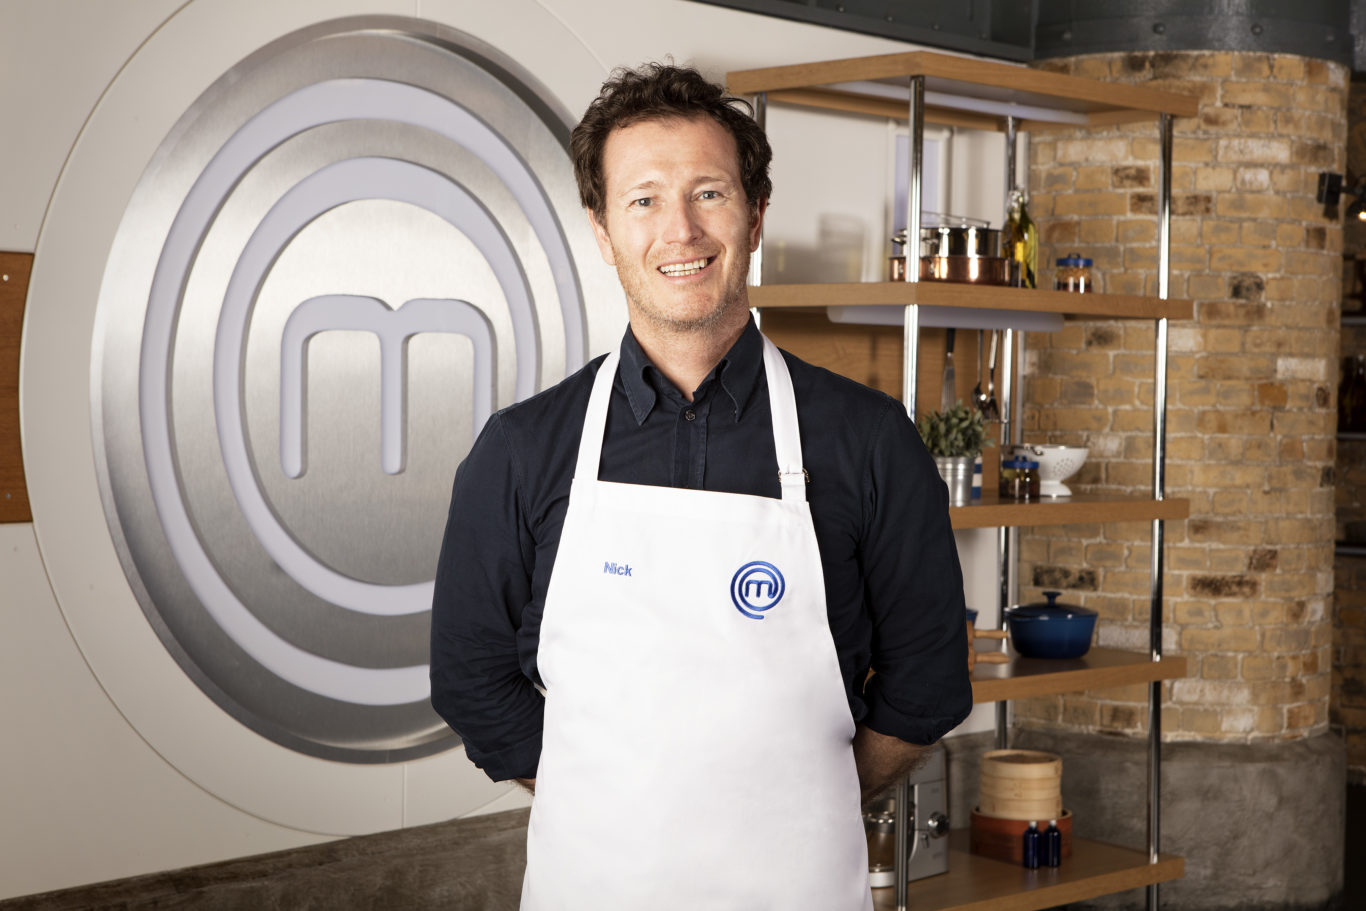 Meet this year’s all-star line-up for Celebrity MasterChef.